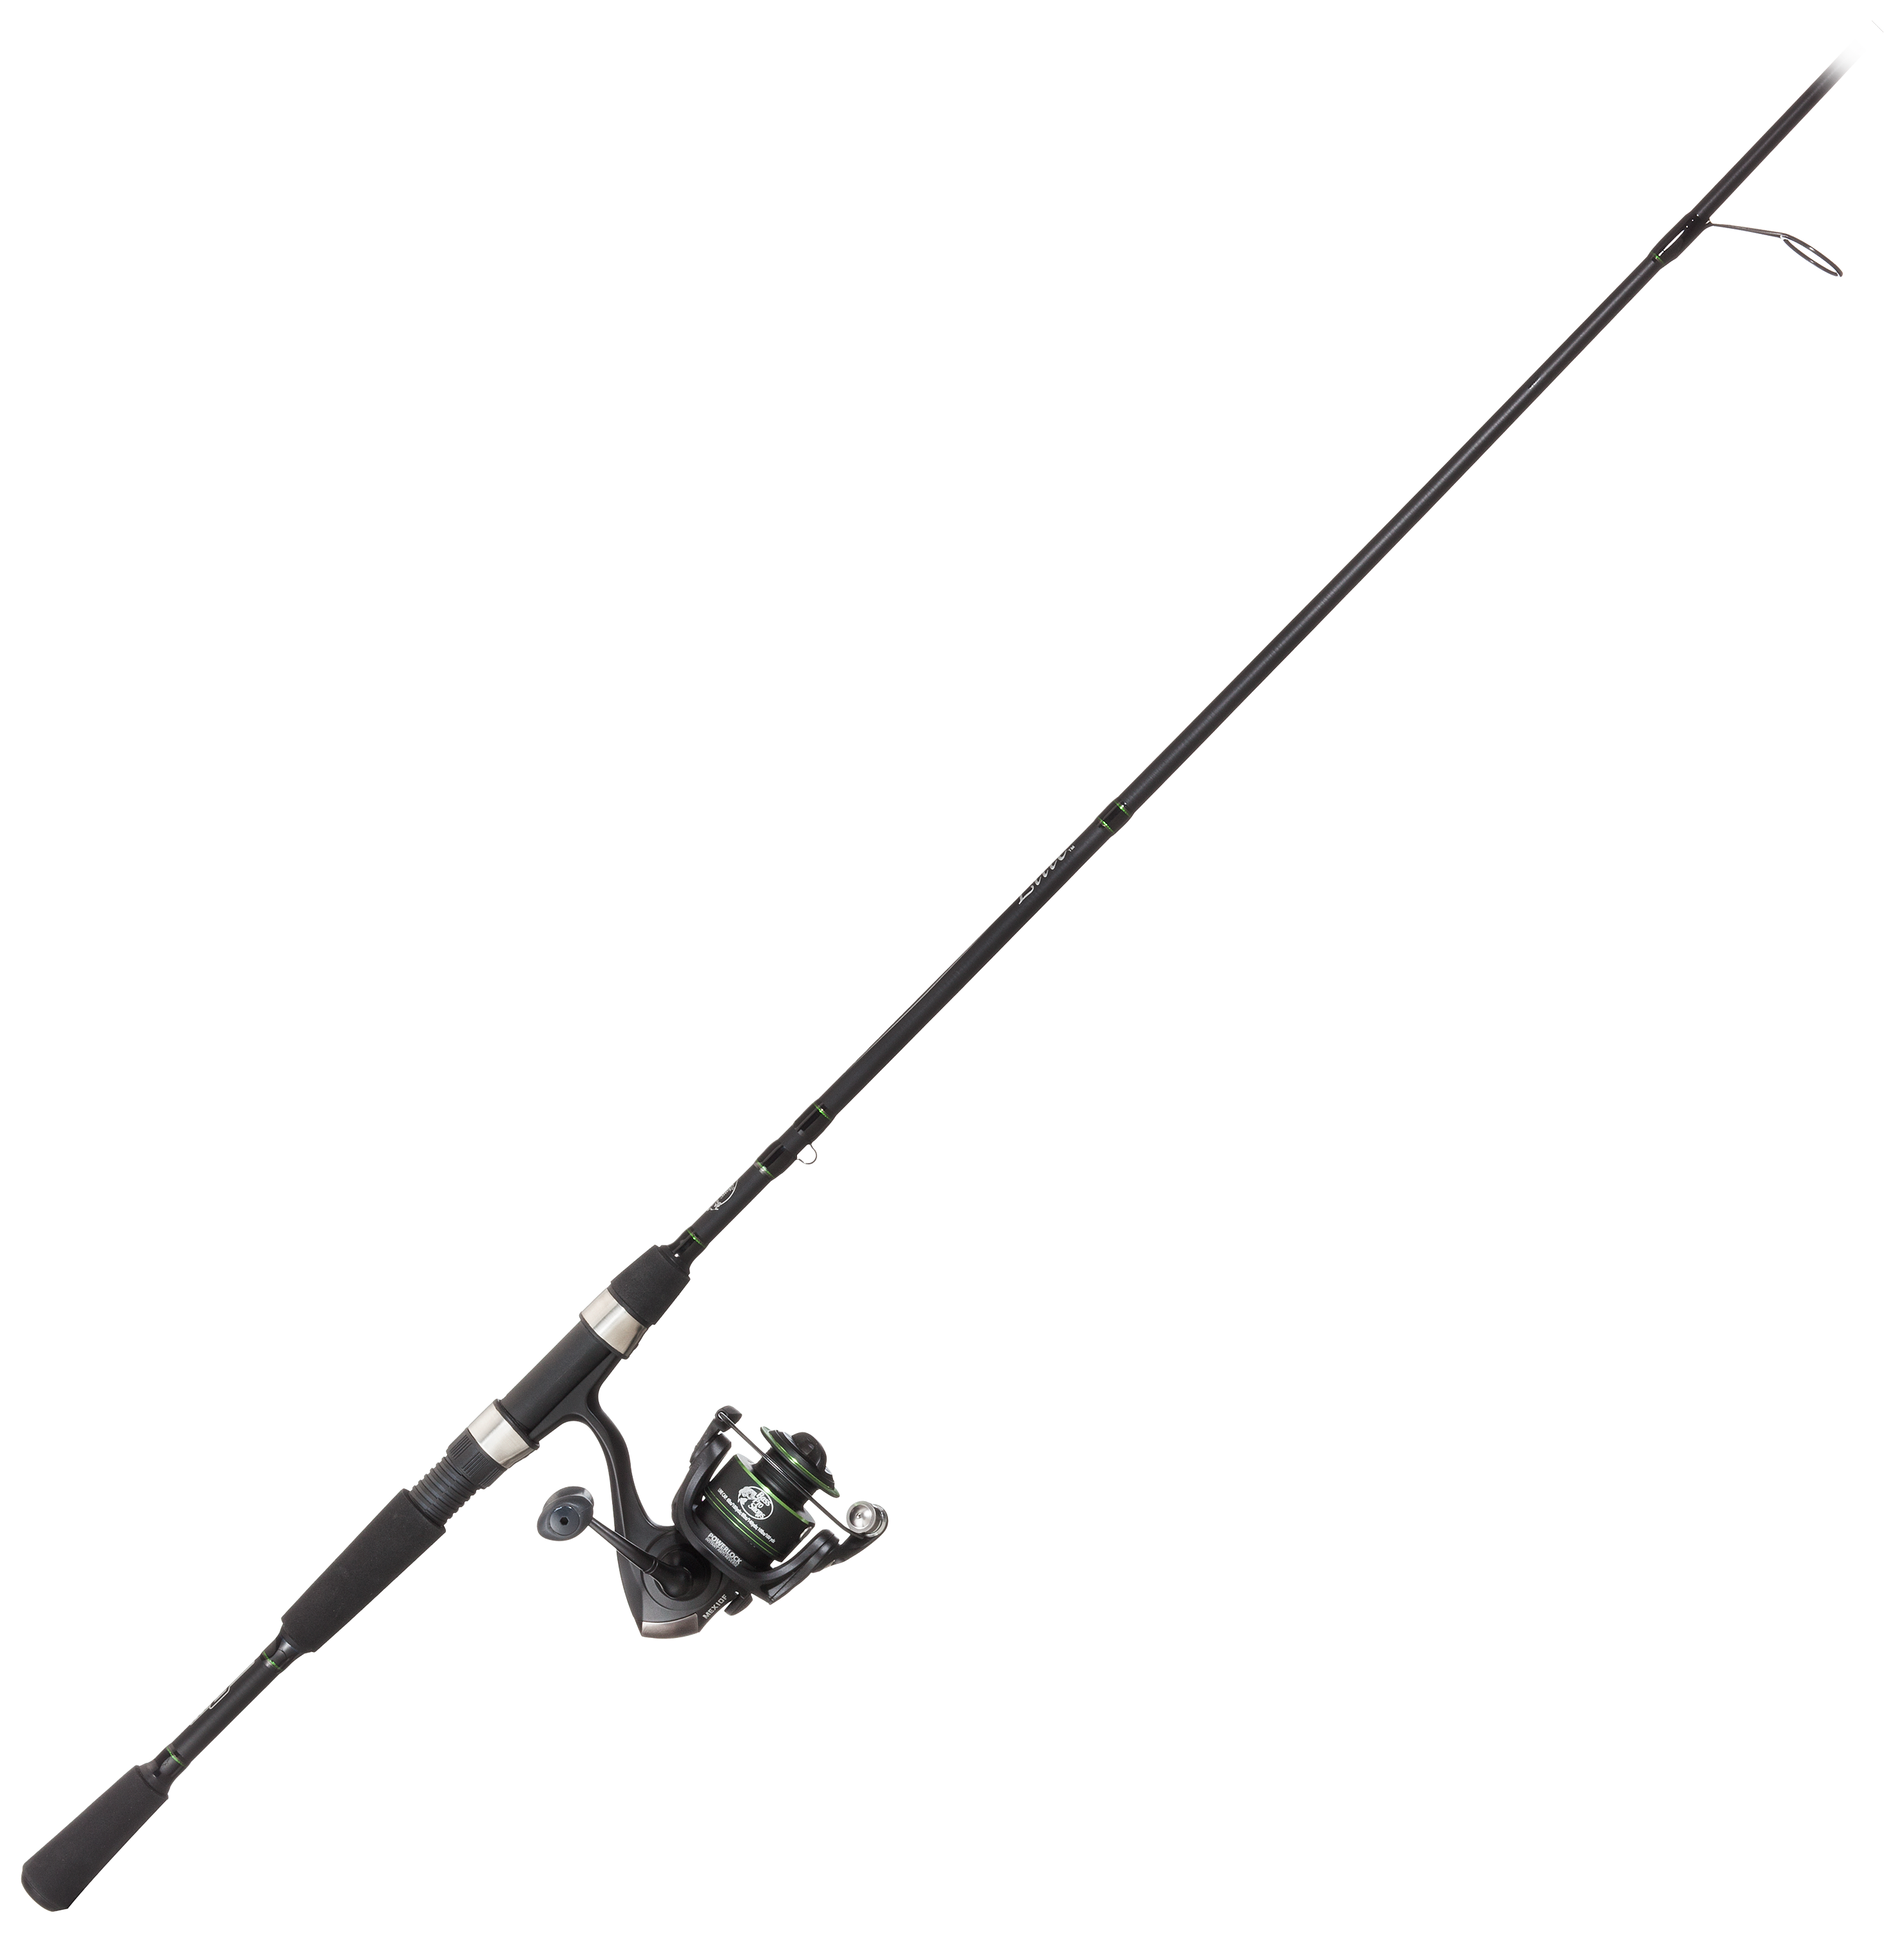 Light Saltwater Fishing Rod & Reel Combos 5.2: 1 Gear Ratio for